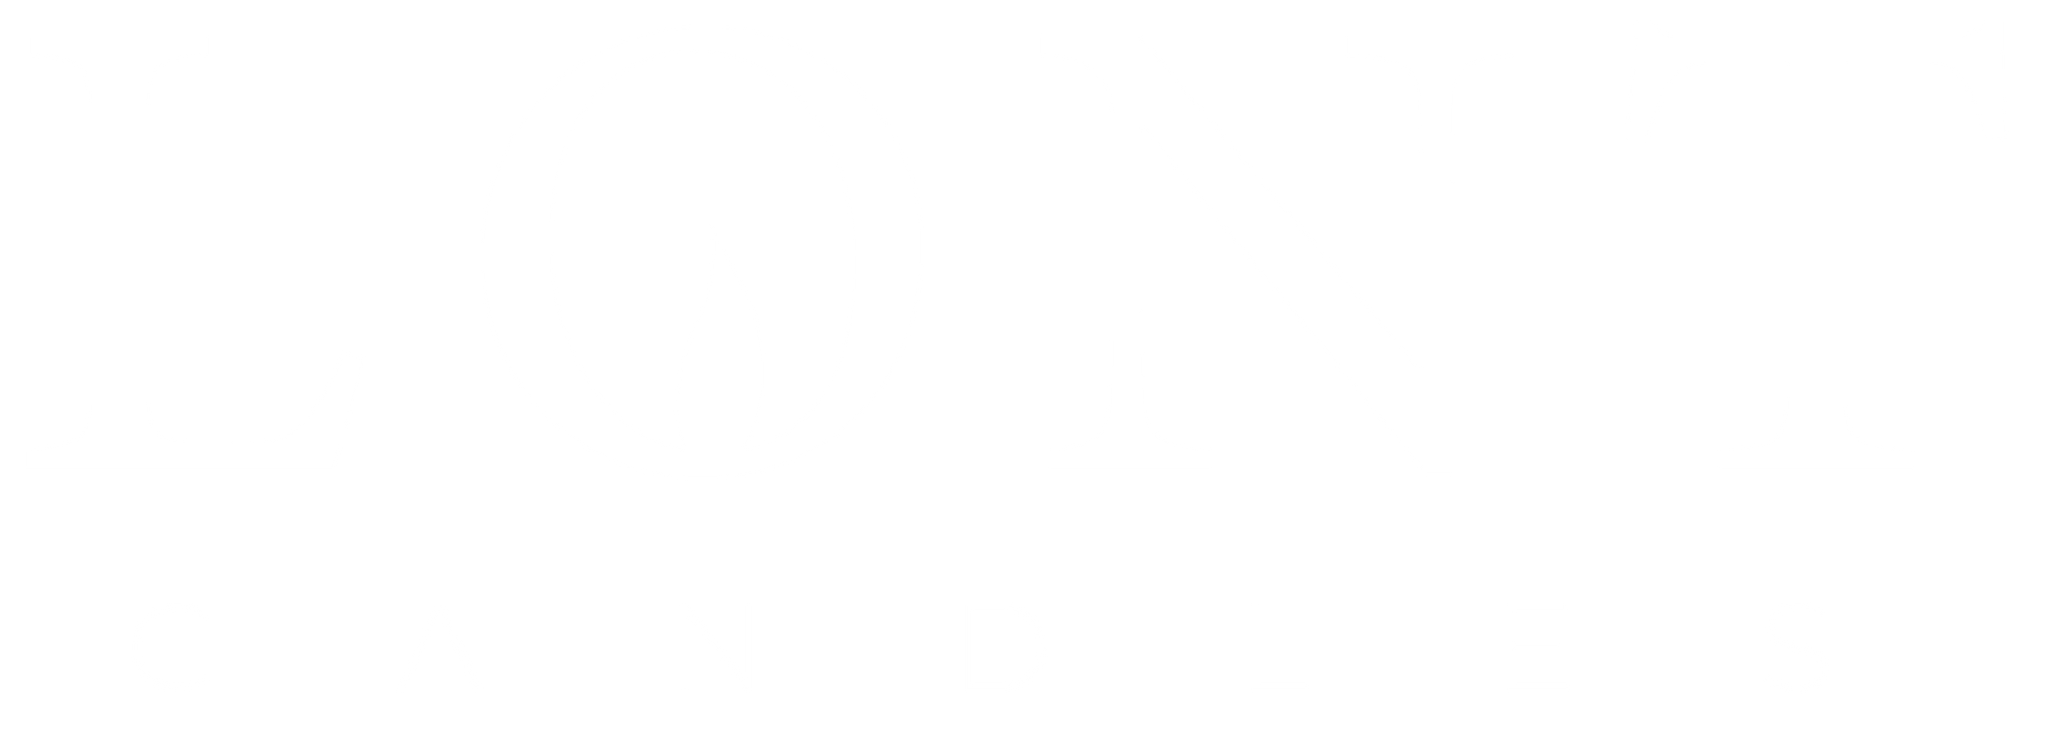 Lont candles